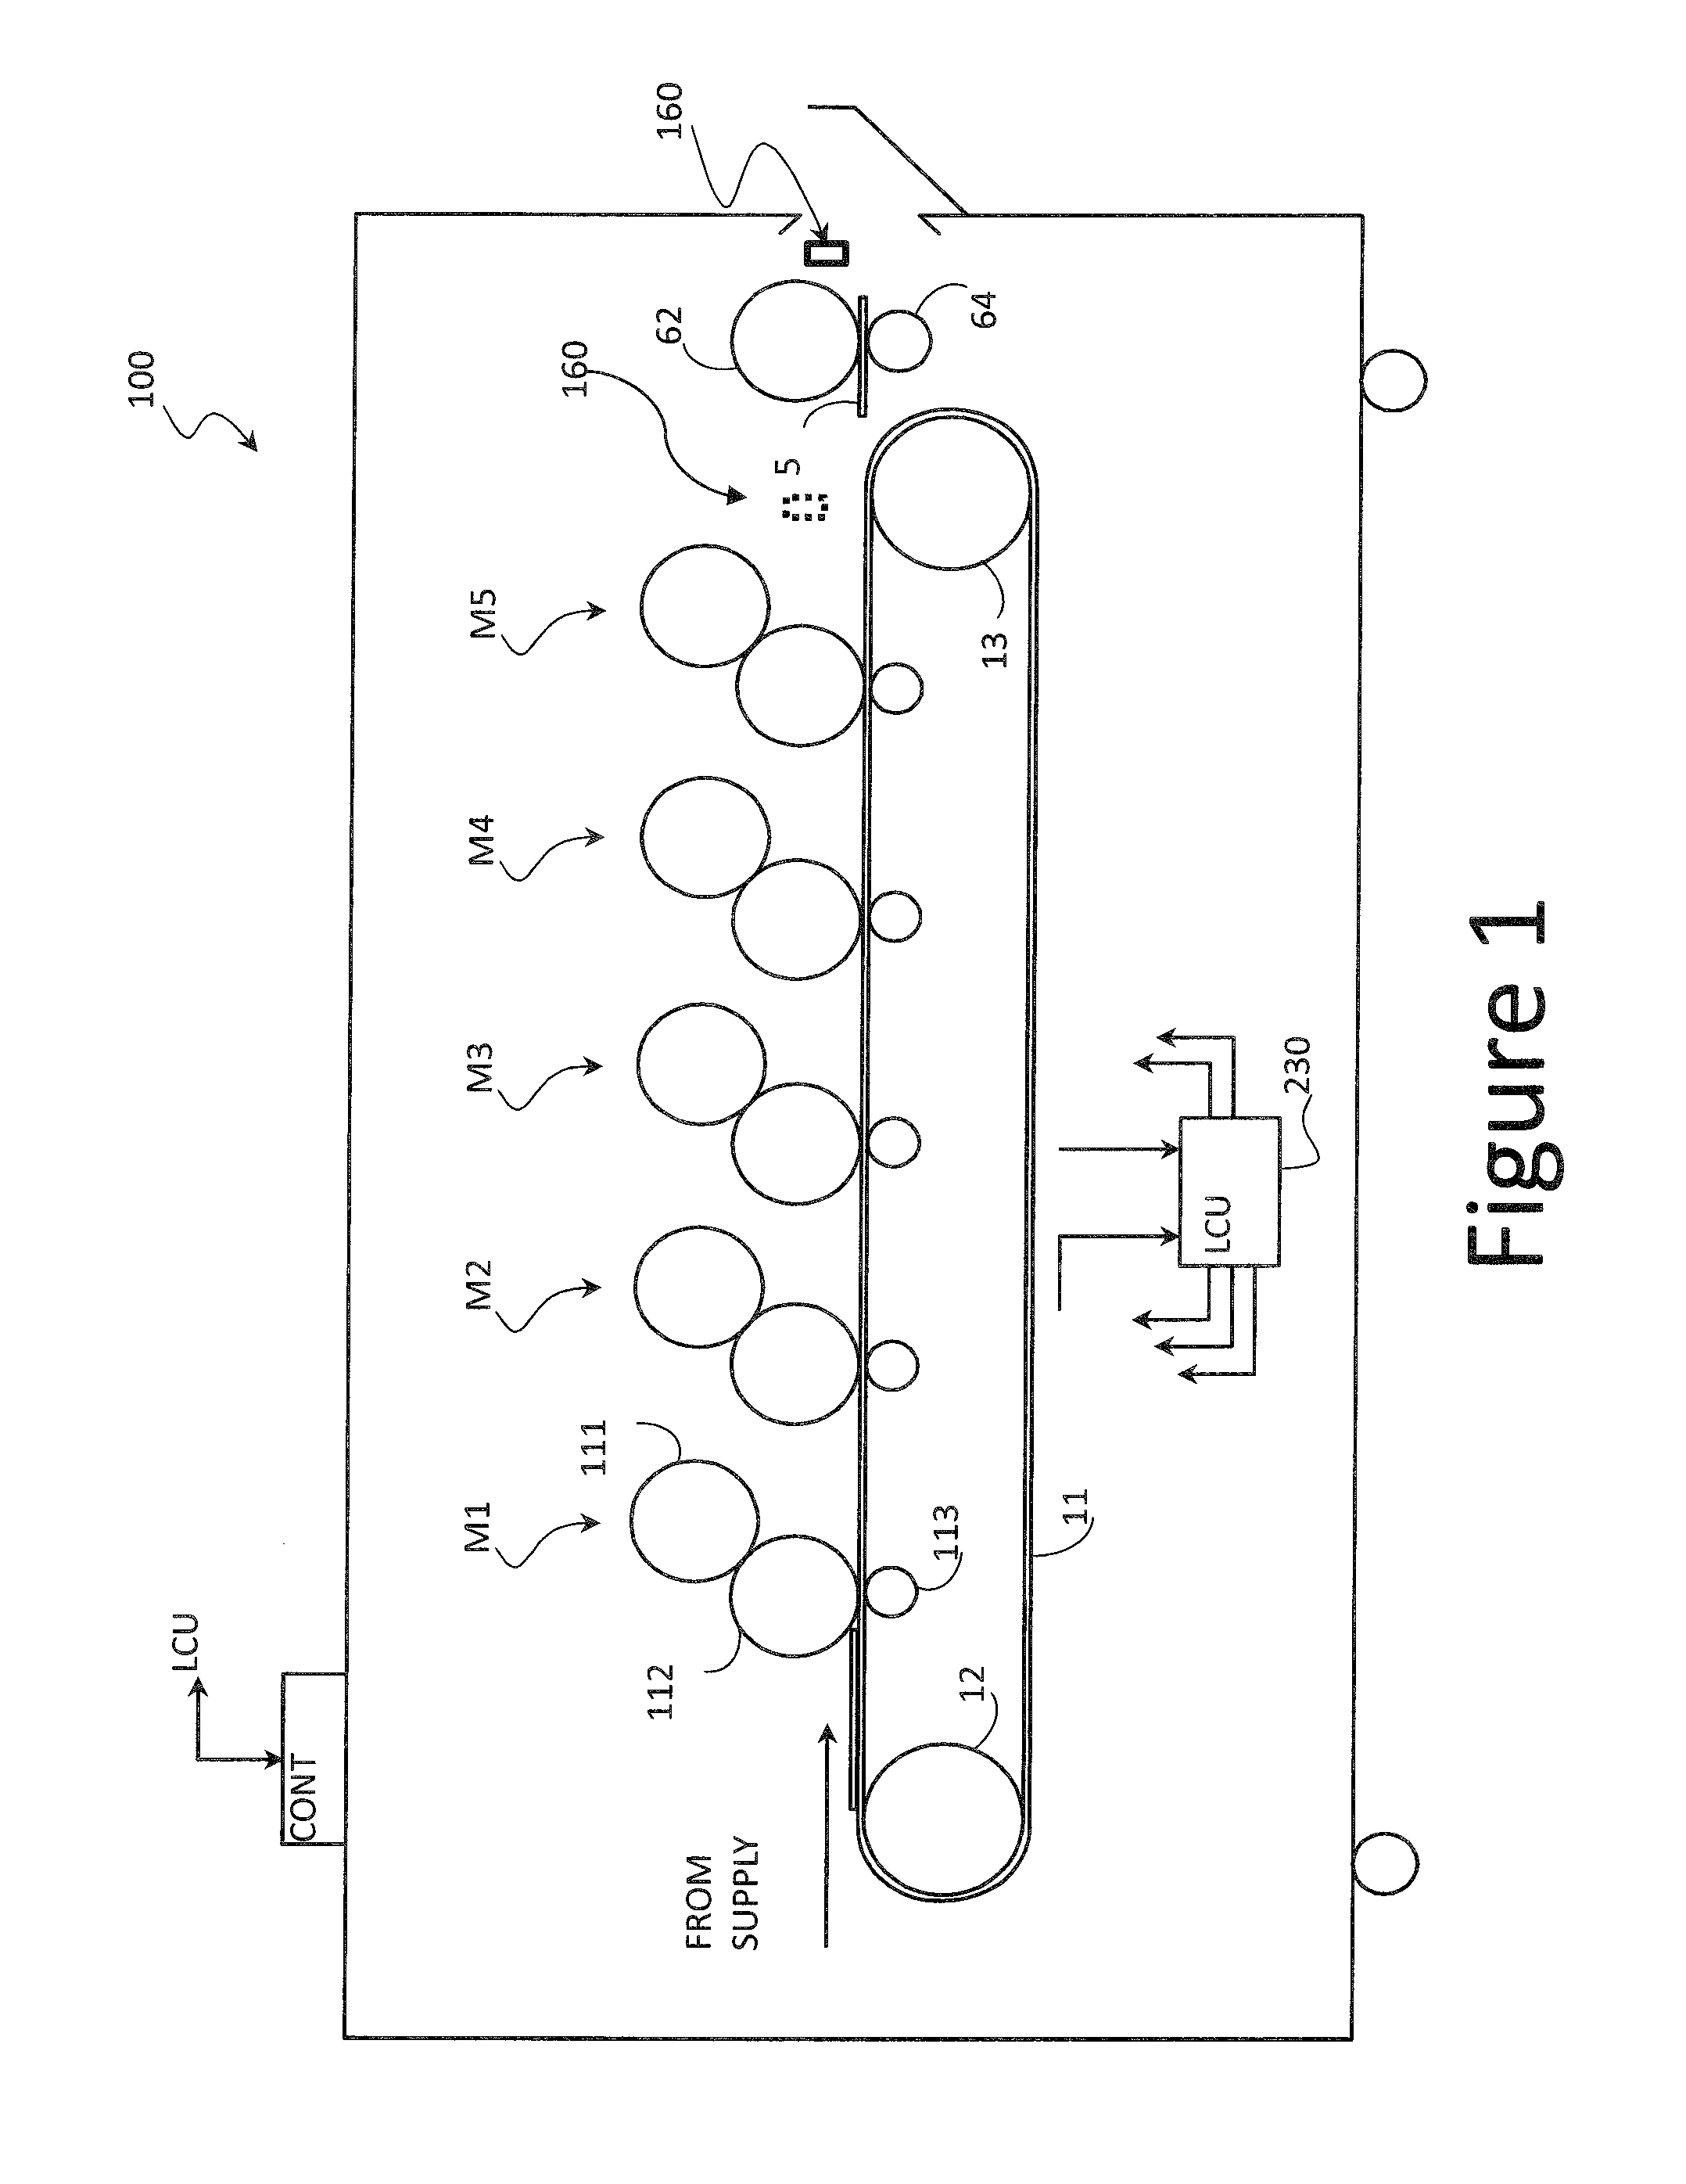 Method for calibrating specialty color toner